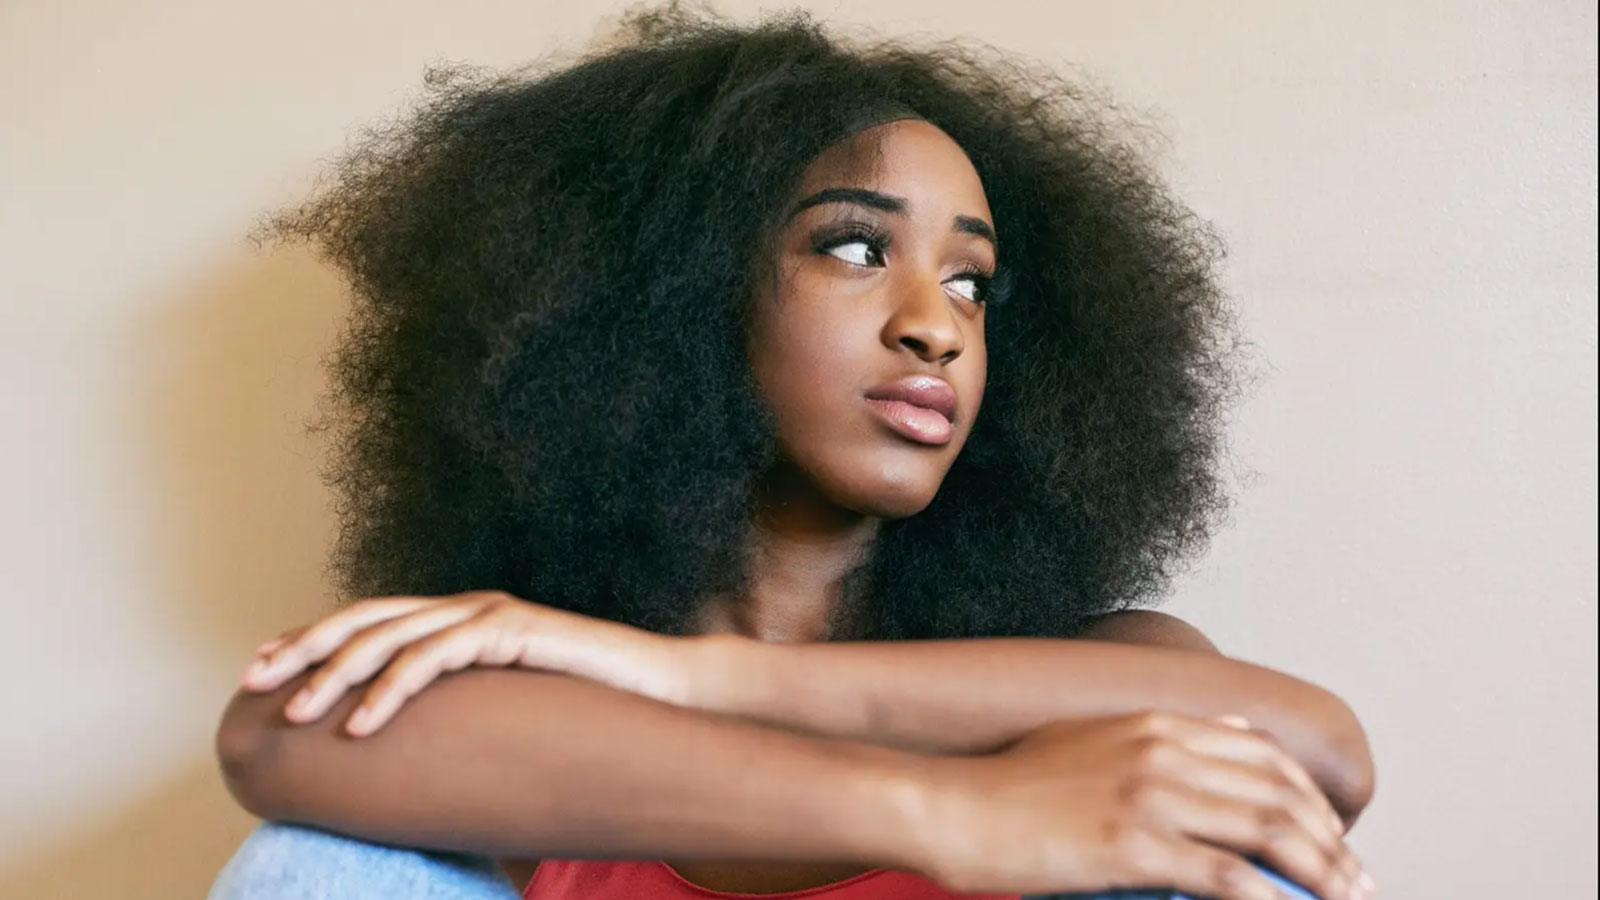 Black women in America are up against a lot, and it’s causing their bodies to weather